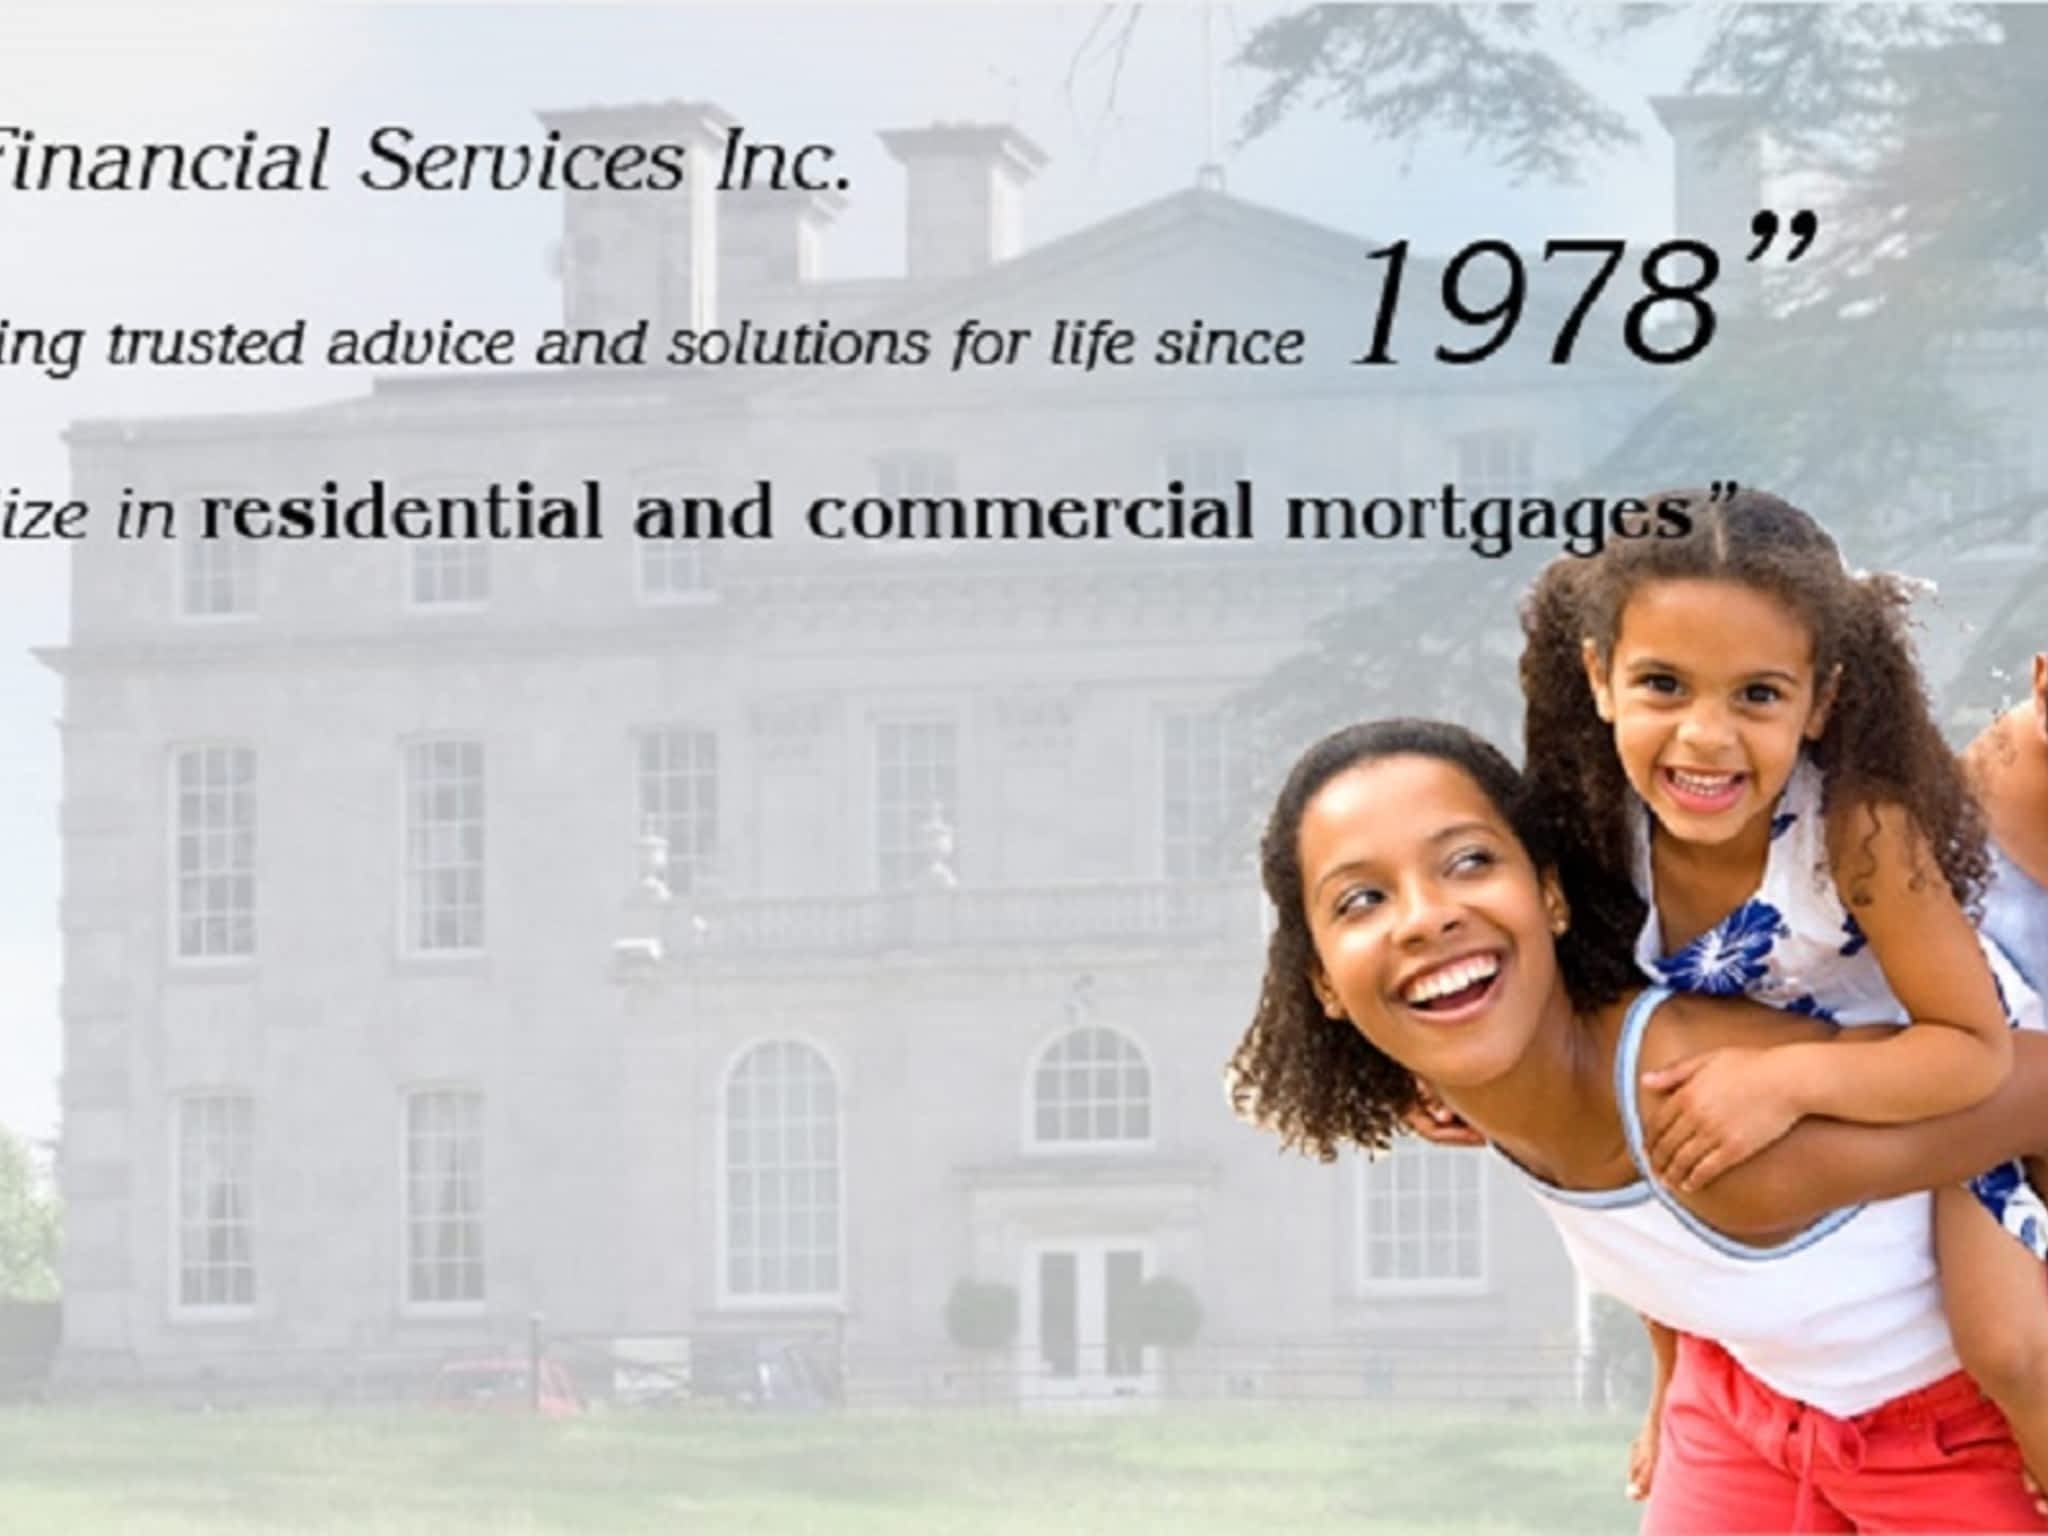 photo Admore Financial Services Inc